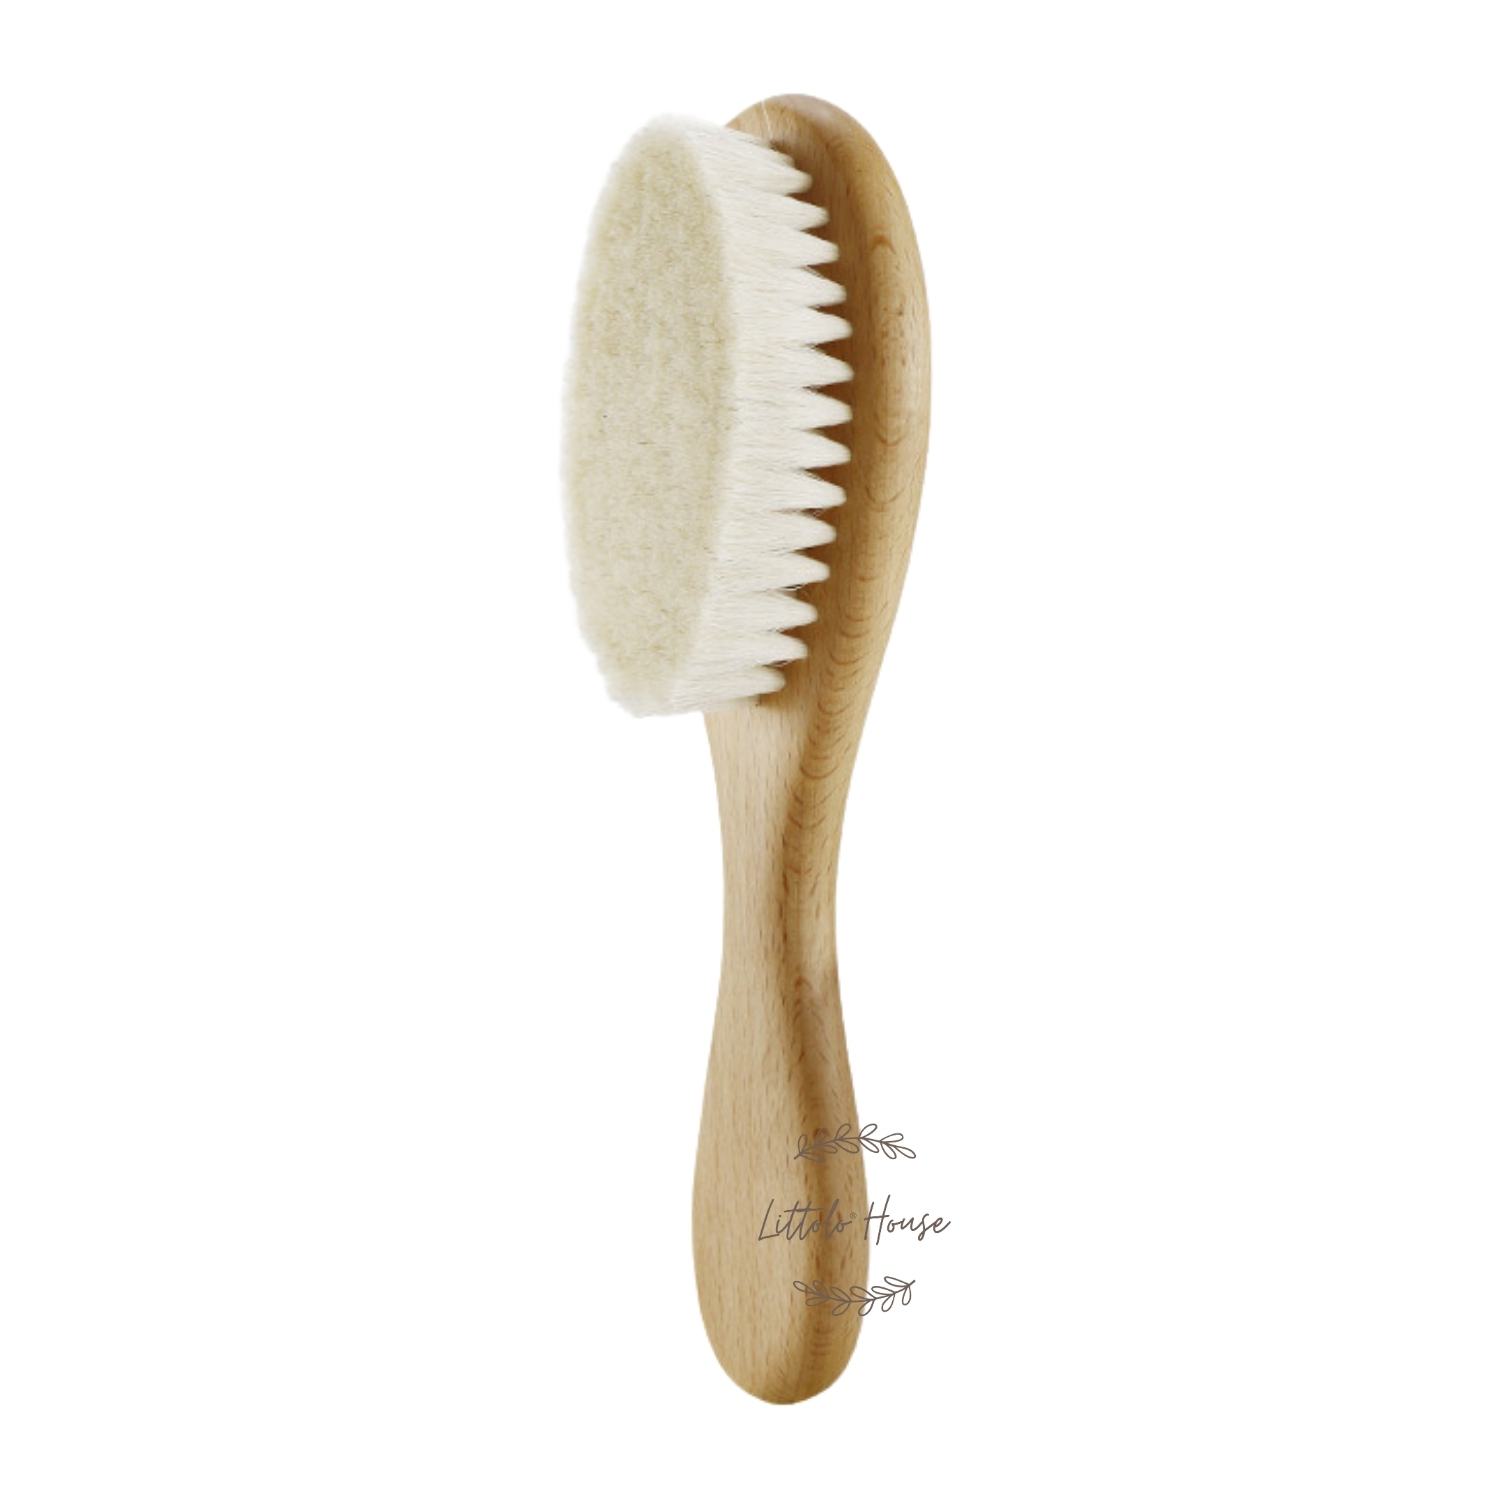 Soft Bristle Wooden Hair Brush – Pack for Camp